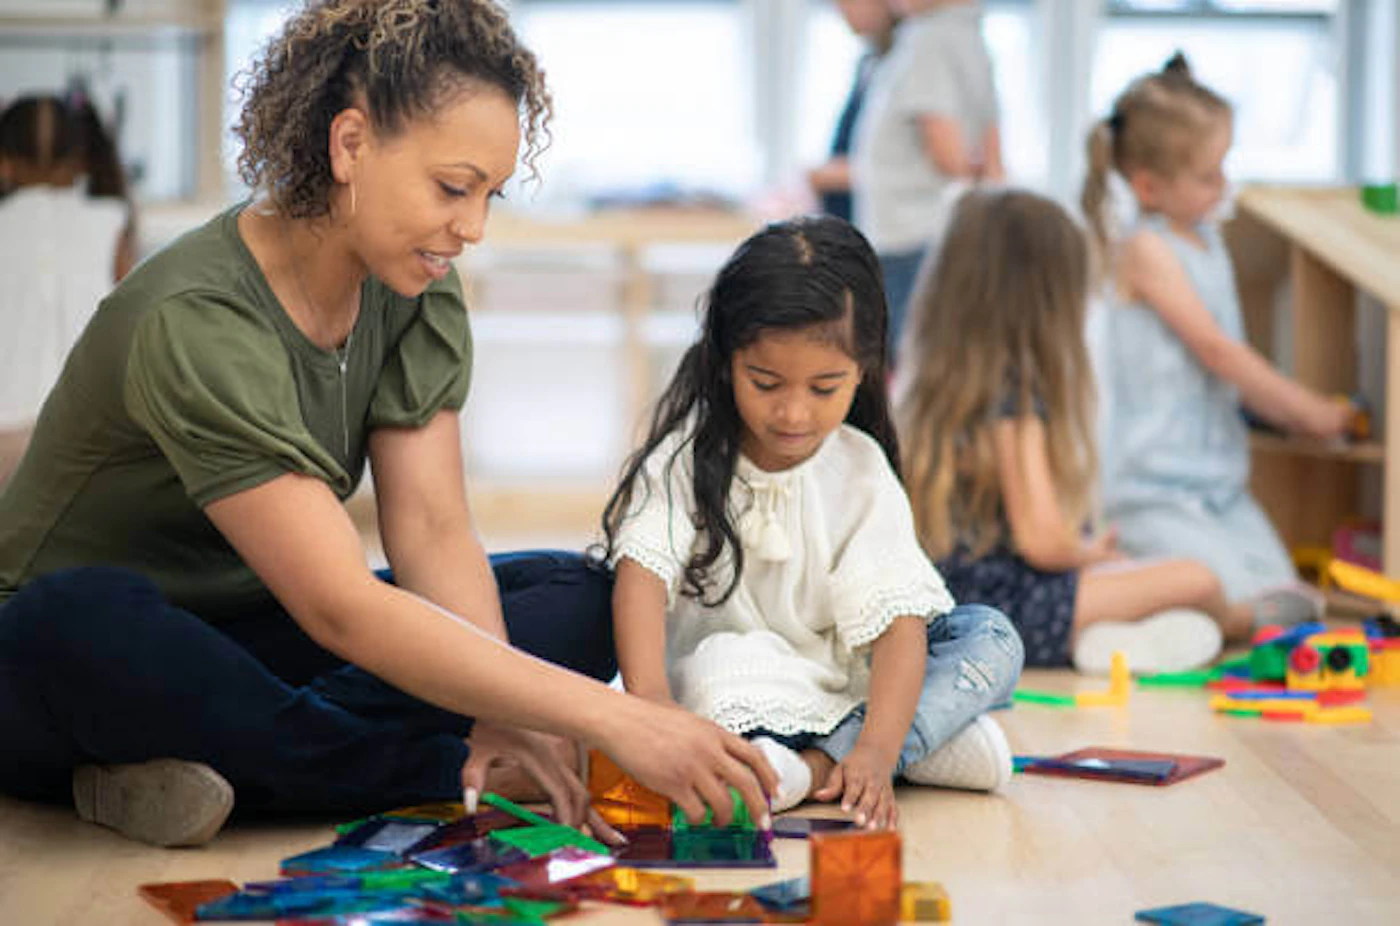 Wisconsin's child care system is in crisis as funding from critical programs is set to run out (photo via iStock).